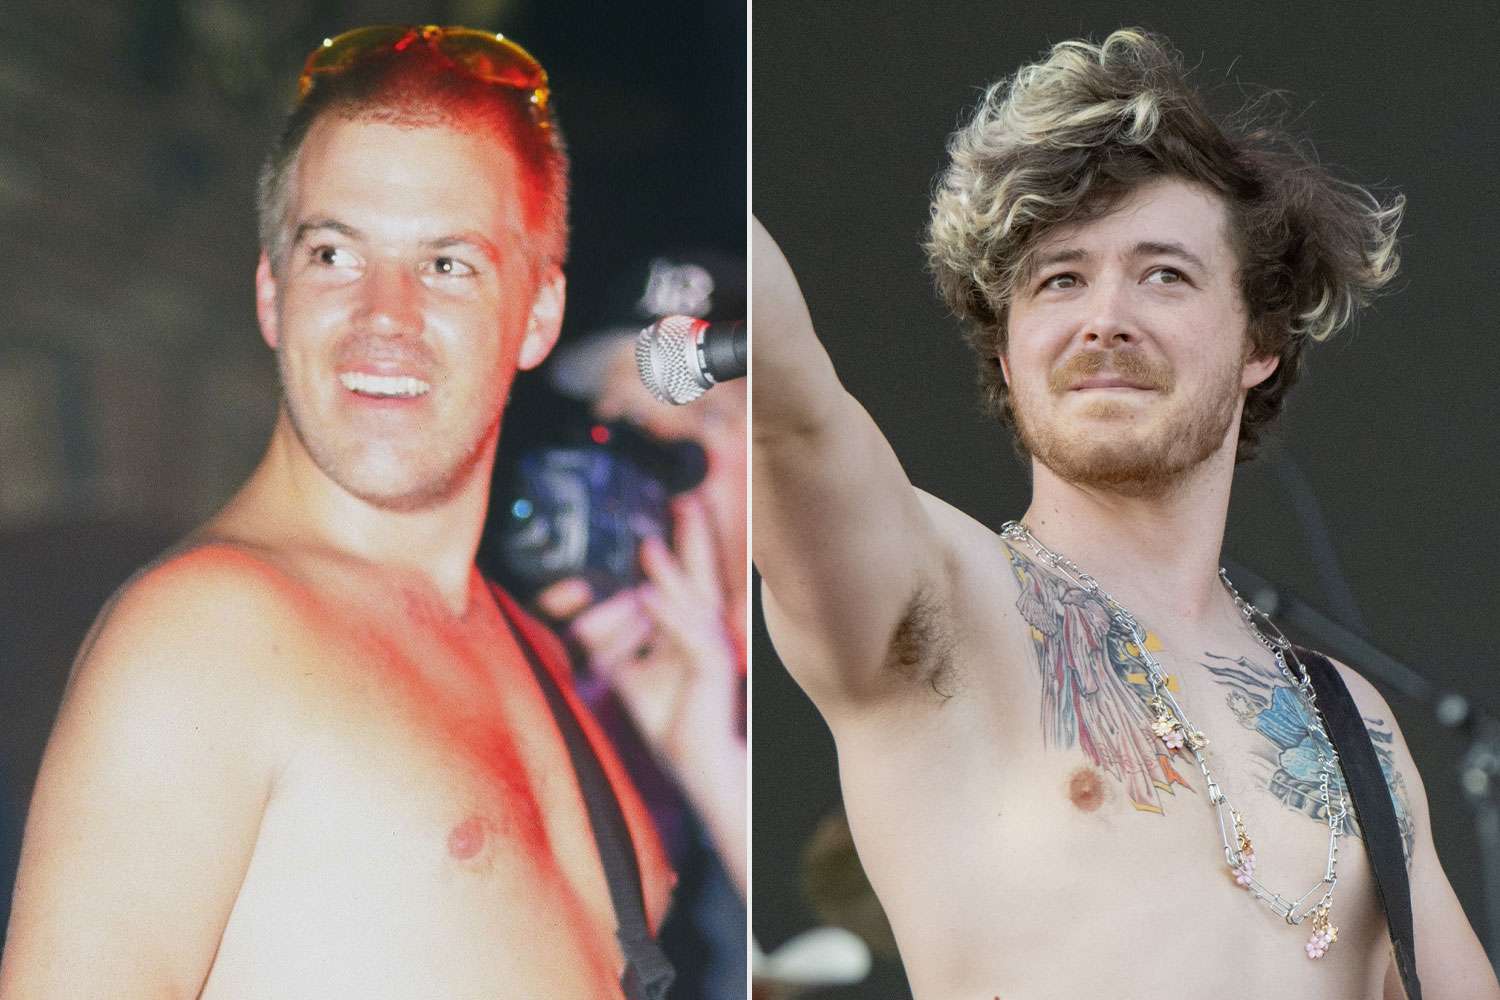 Sublime to release first new song in 28 years, featuring the late Bradley Nowell and his son